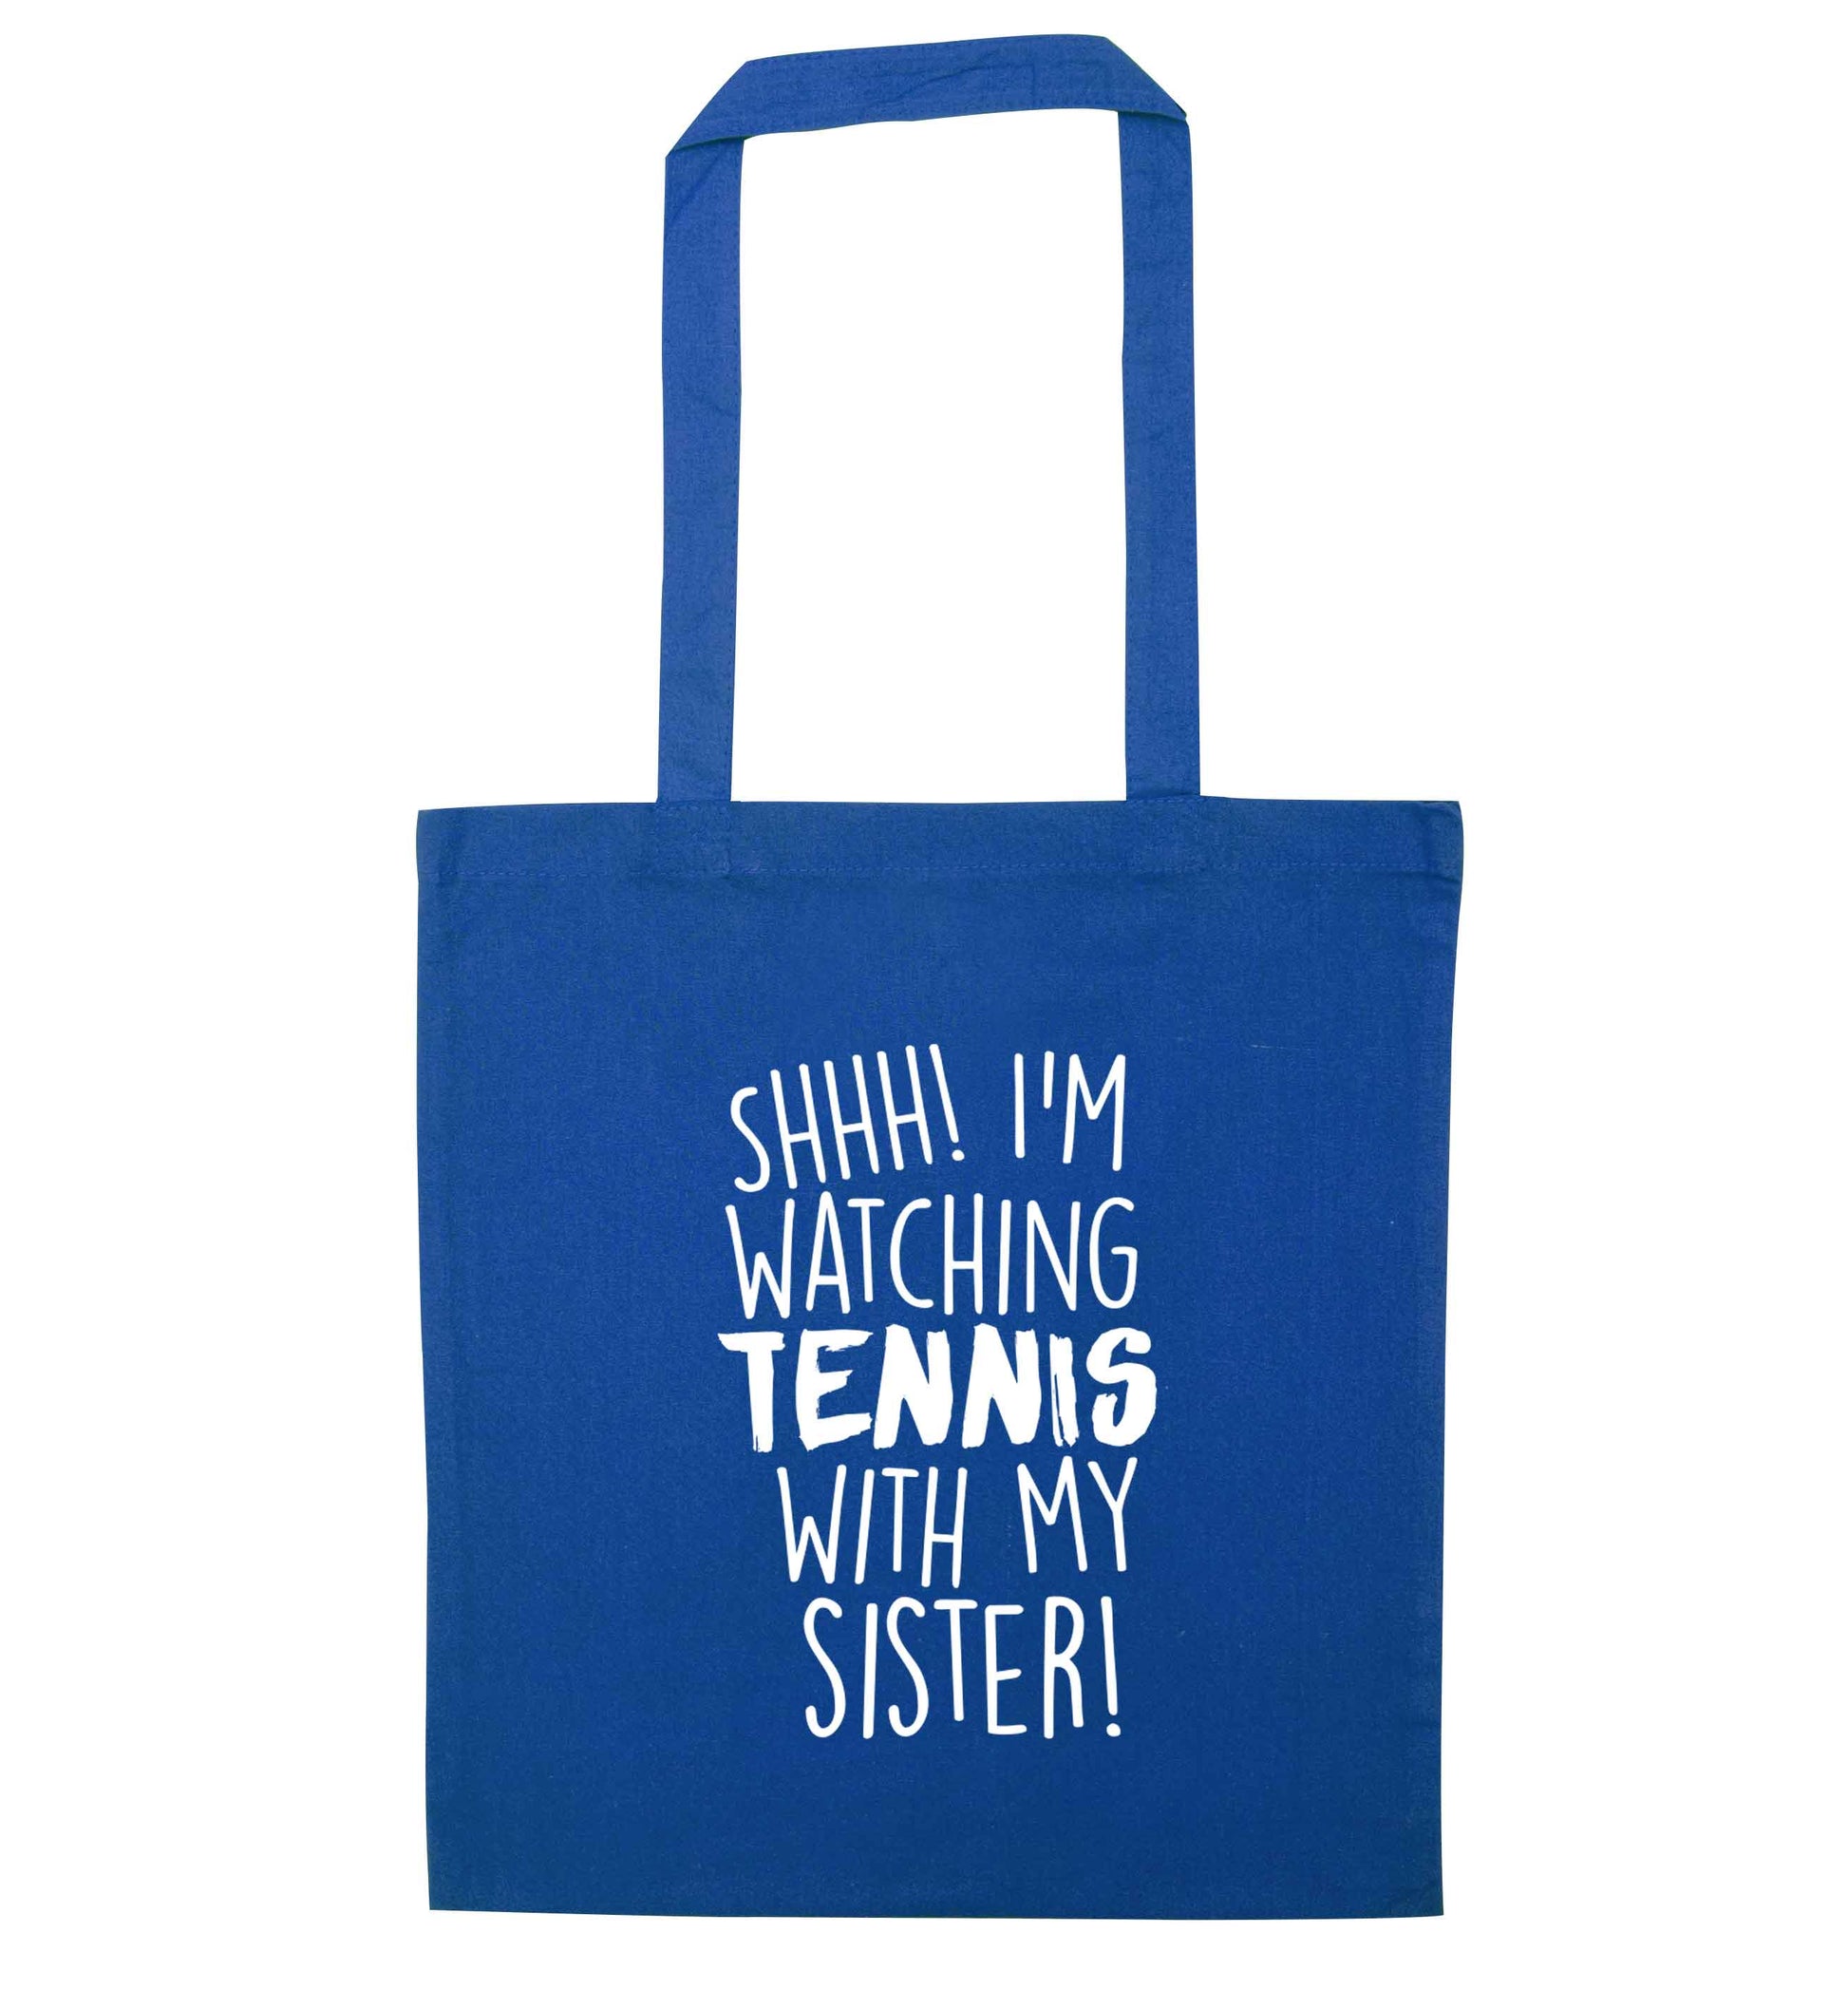 Shh! I'm watching tennis with my sister! blue tote bag